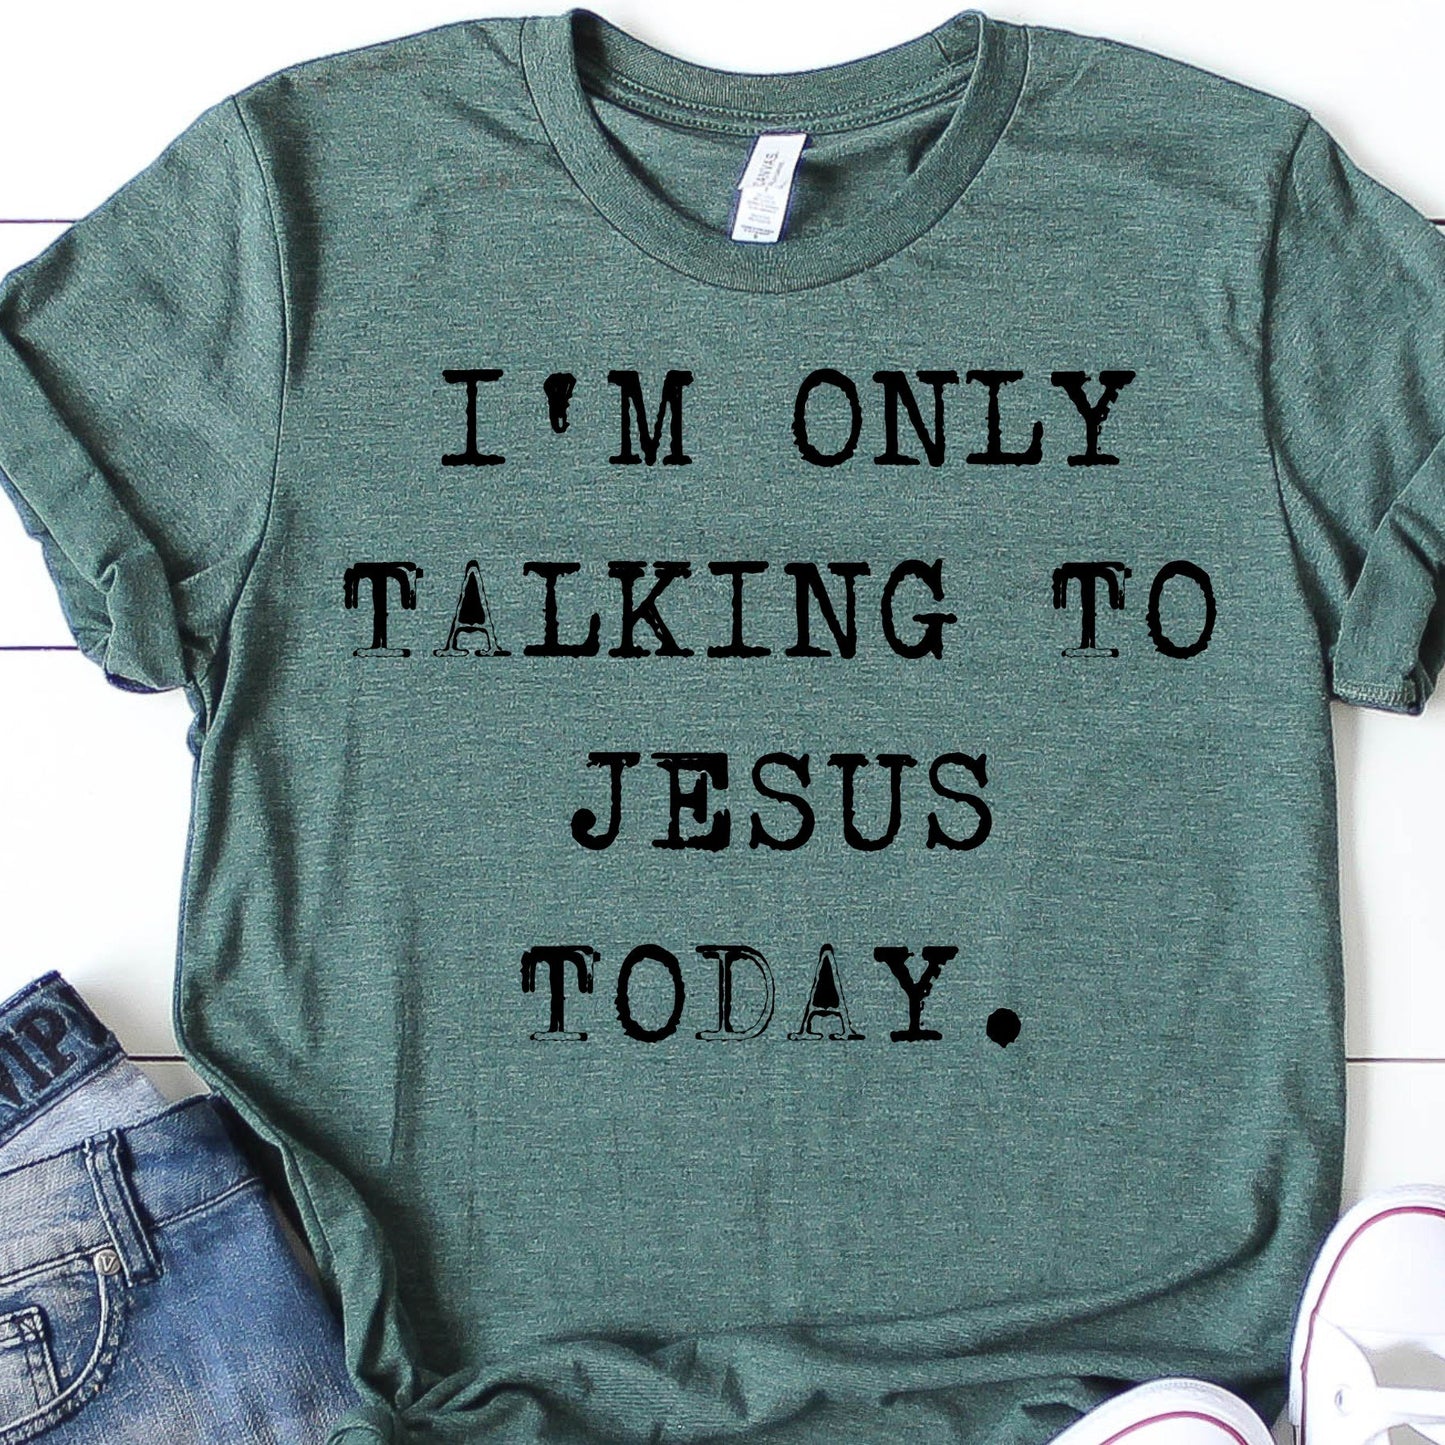 I'm only talking to Jesus today